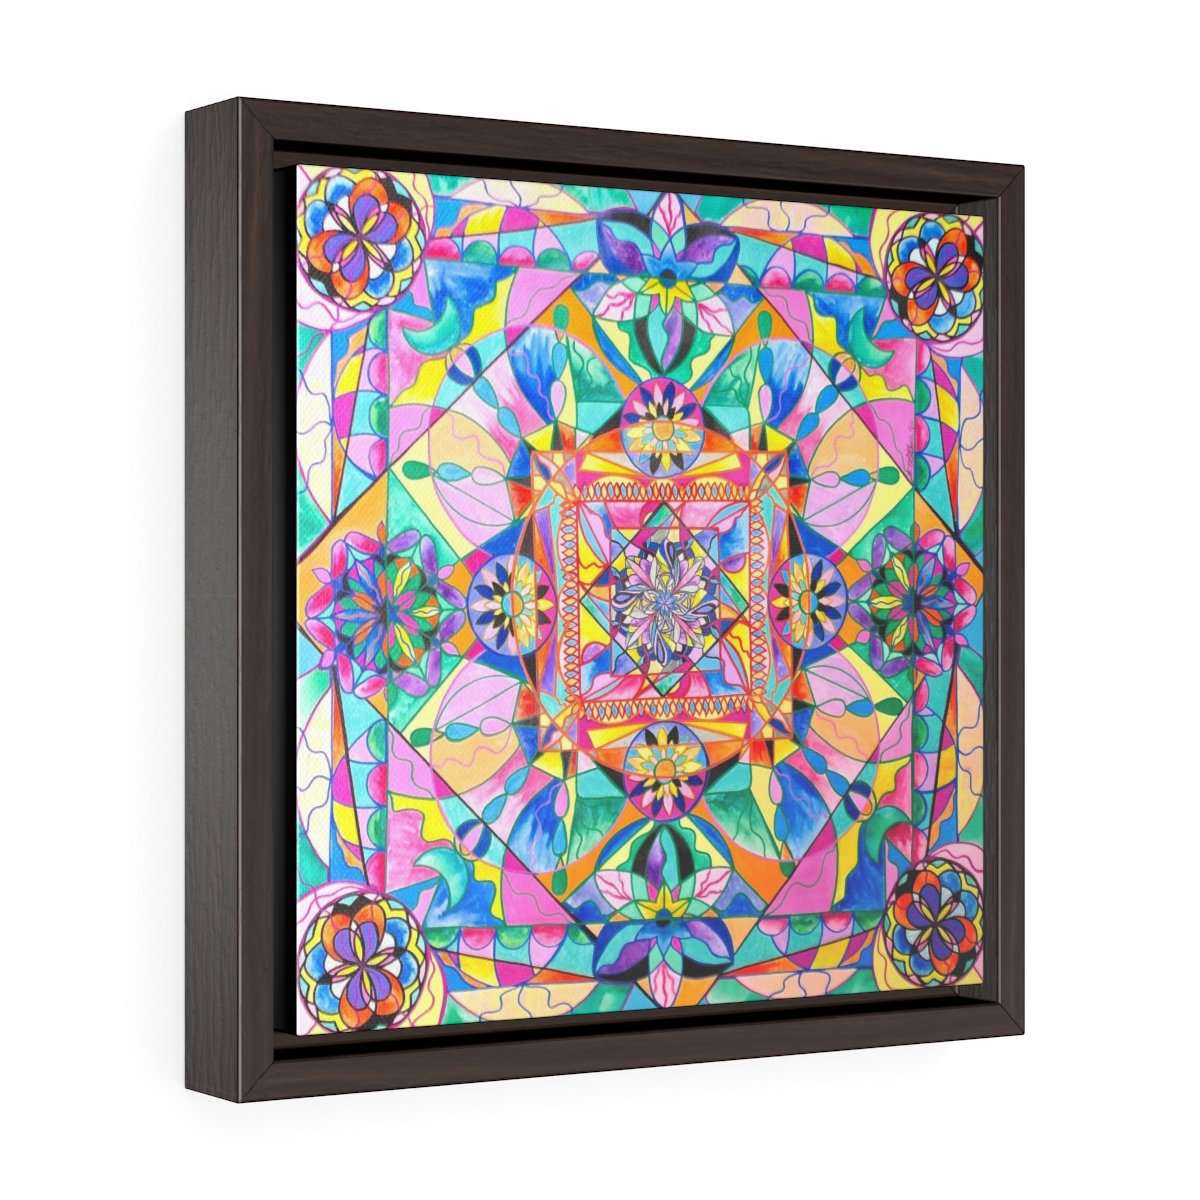 we-believe-in-helping-you-find-the-perfect-renewal-square-framed-premium-gallery-wrap-canvas-hot-on-sale_1.jpg